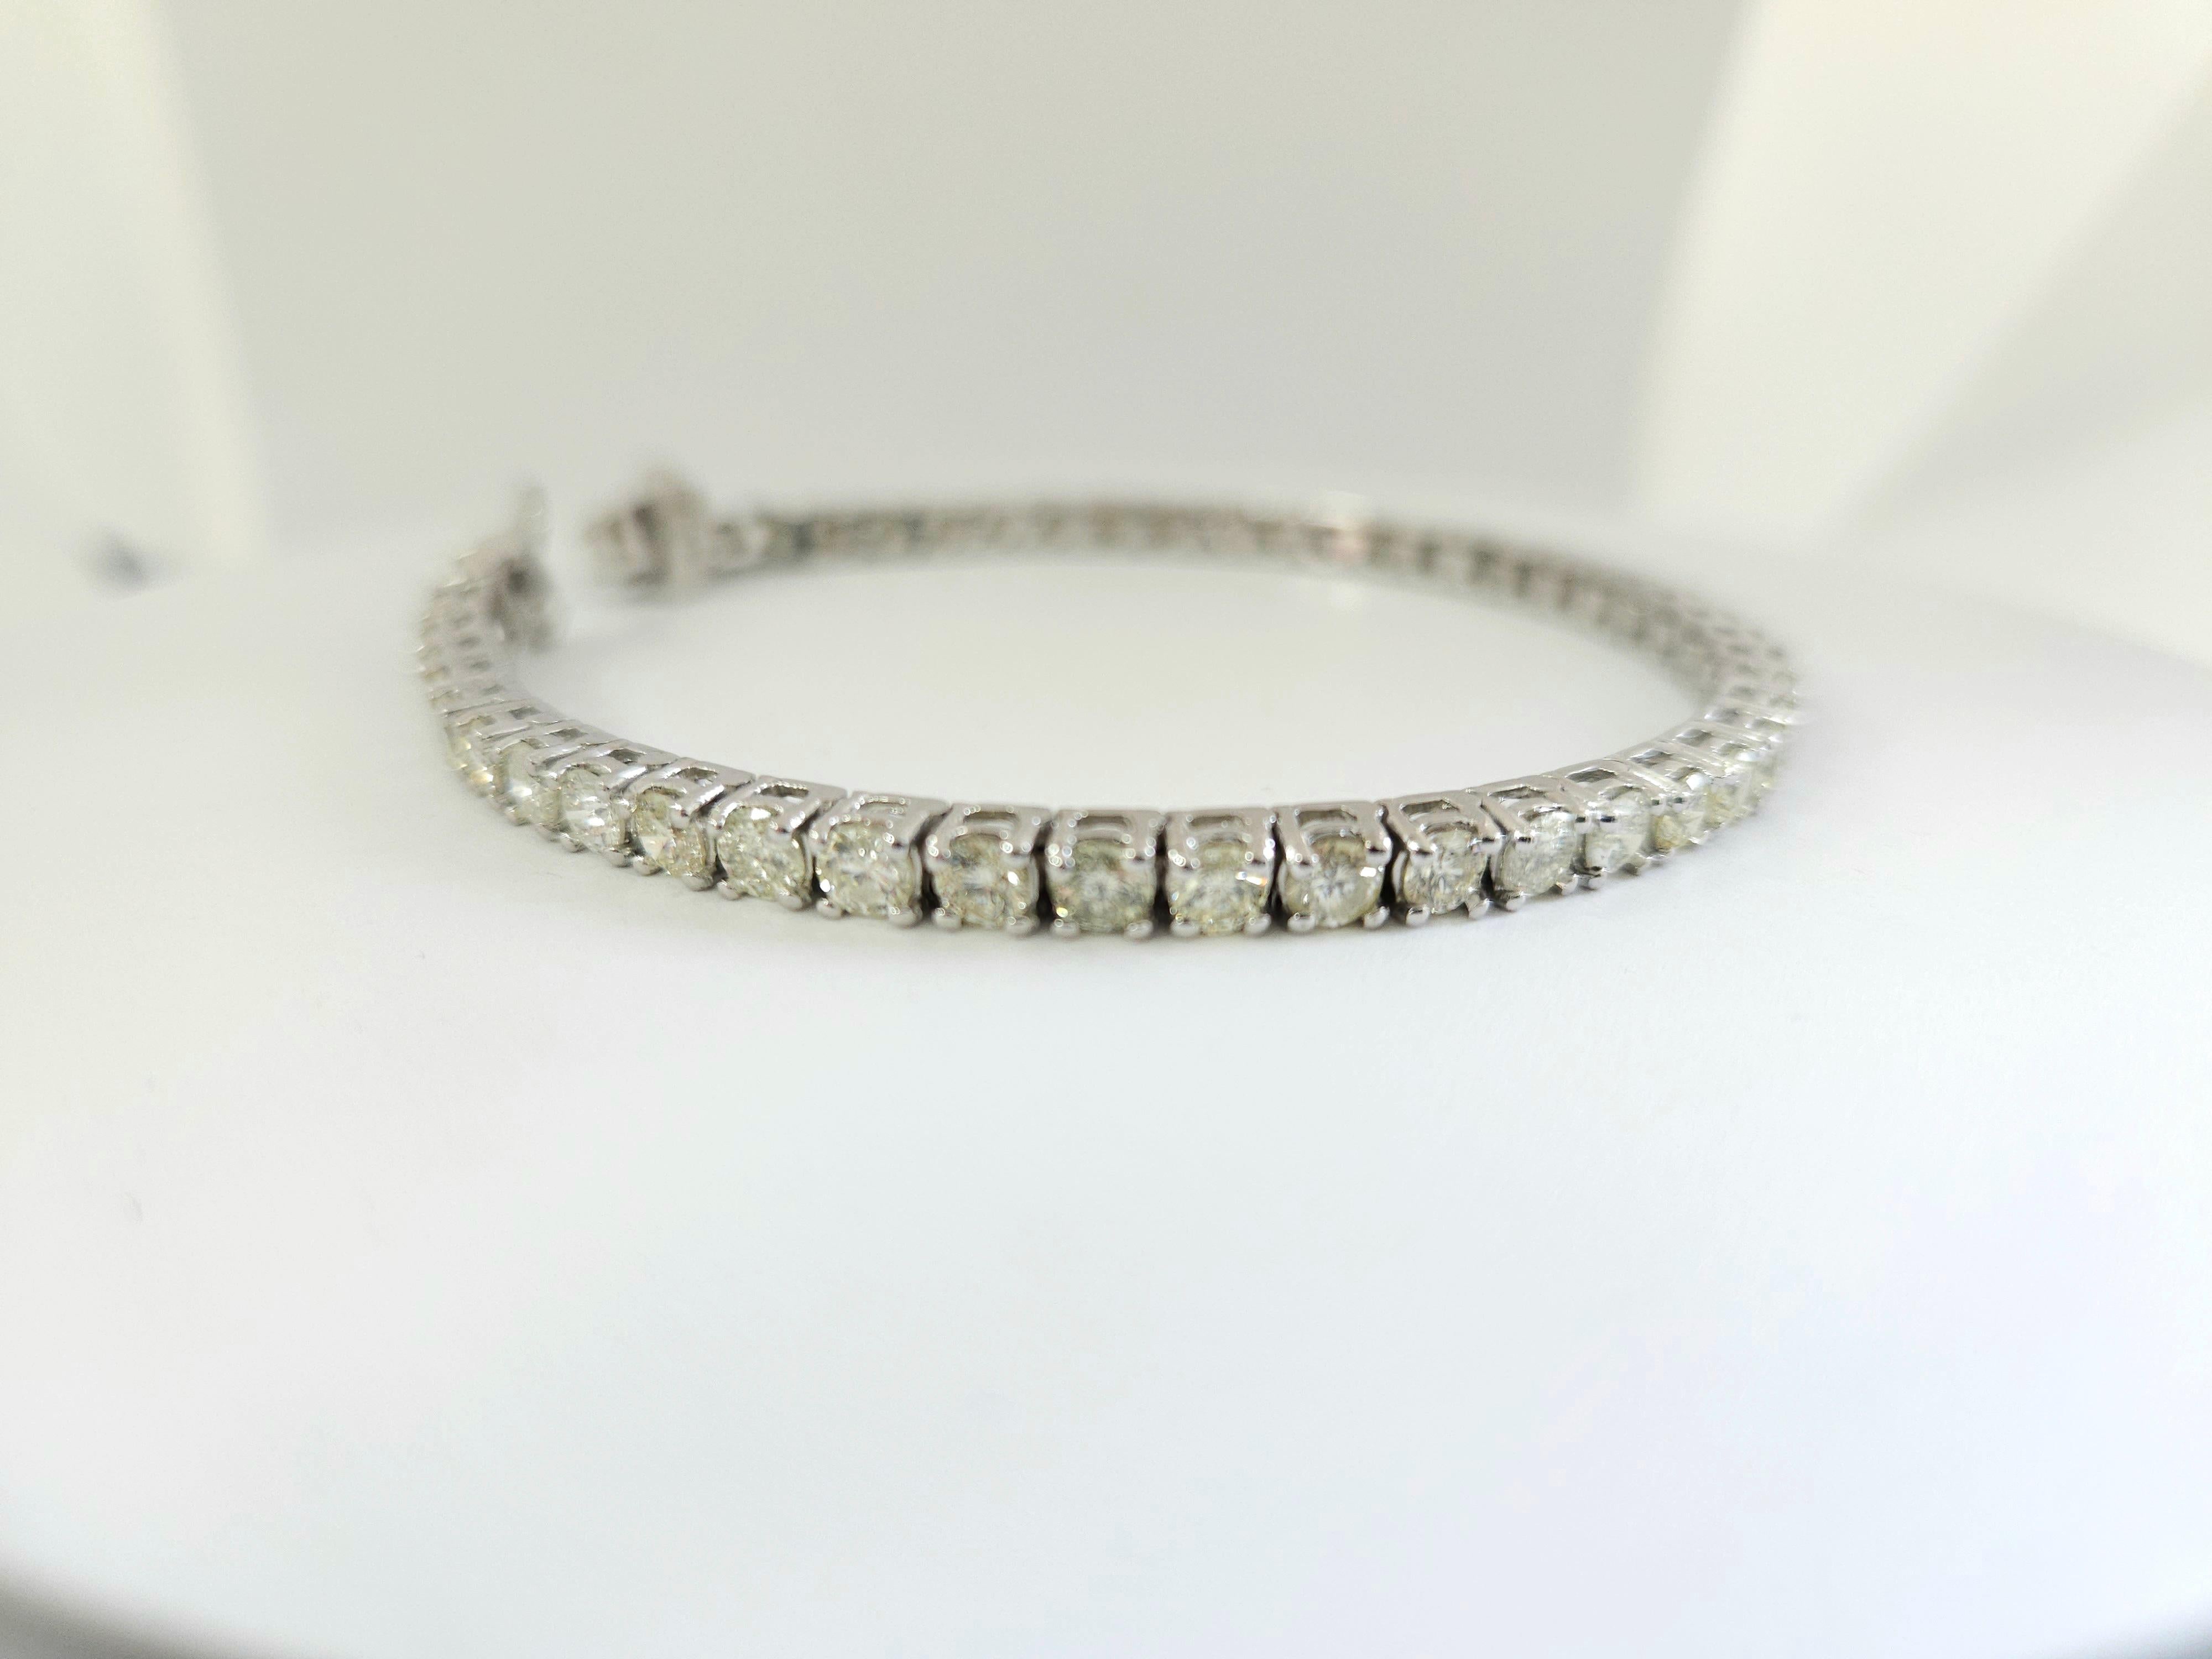 Natural diamonds tennis bracelet round-brilliant cut  14k white gold. 
7 inch. Average Color J, Clarity I 3.70 mm wide,48 pcs, 14.22 grams very shiny don't miss.

*Free shipping within U.S*

